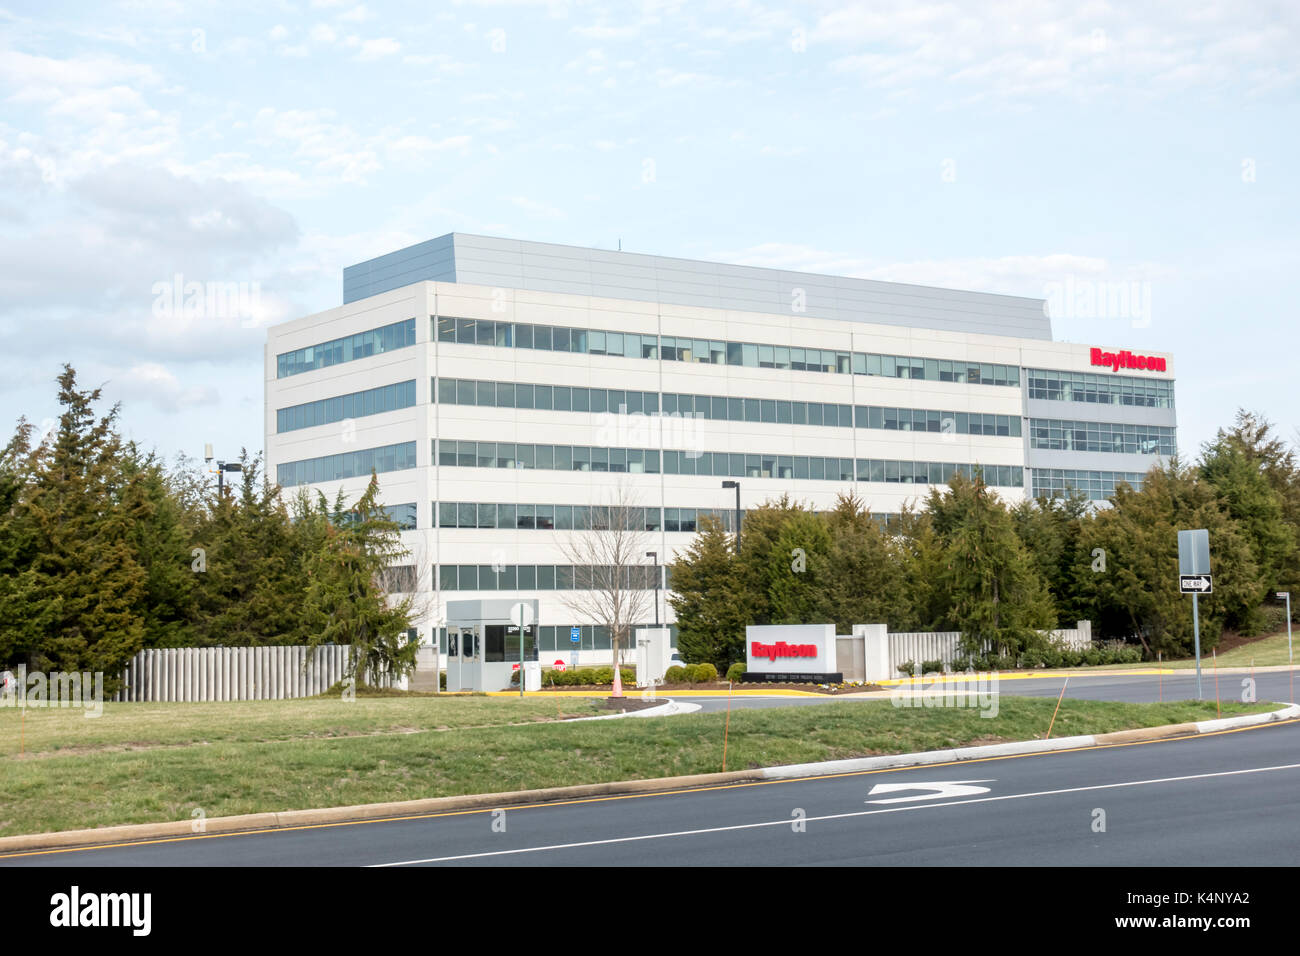 Sterling, VA, USA - March 27, 2017: Raytheon office building in Sterling Virginia. Raytheon is a U.S. Defense Contractor. Stock Photo